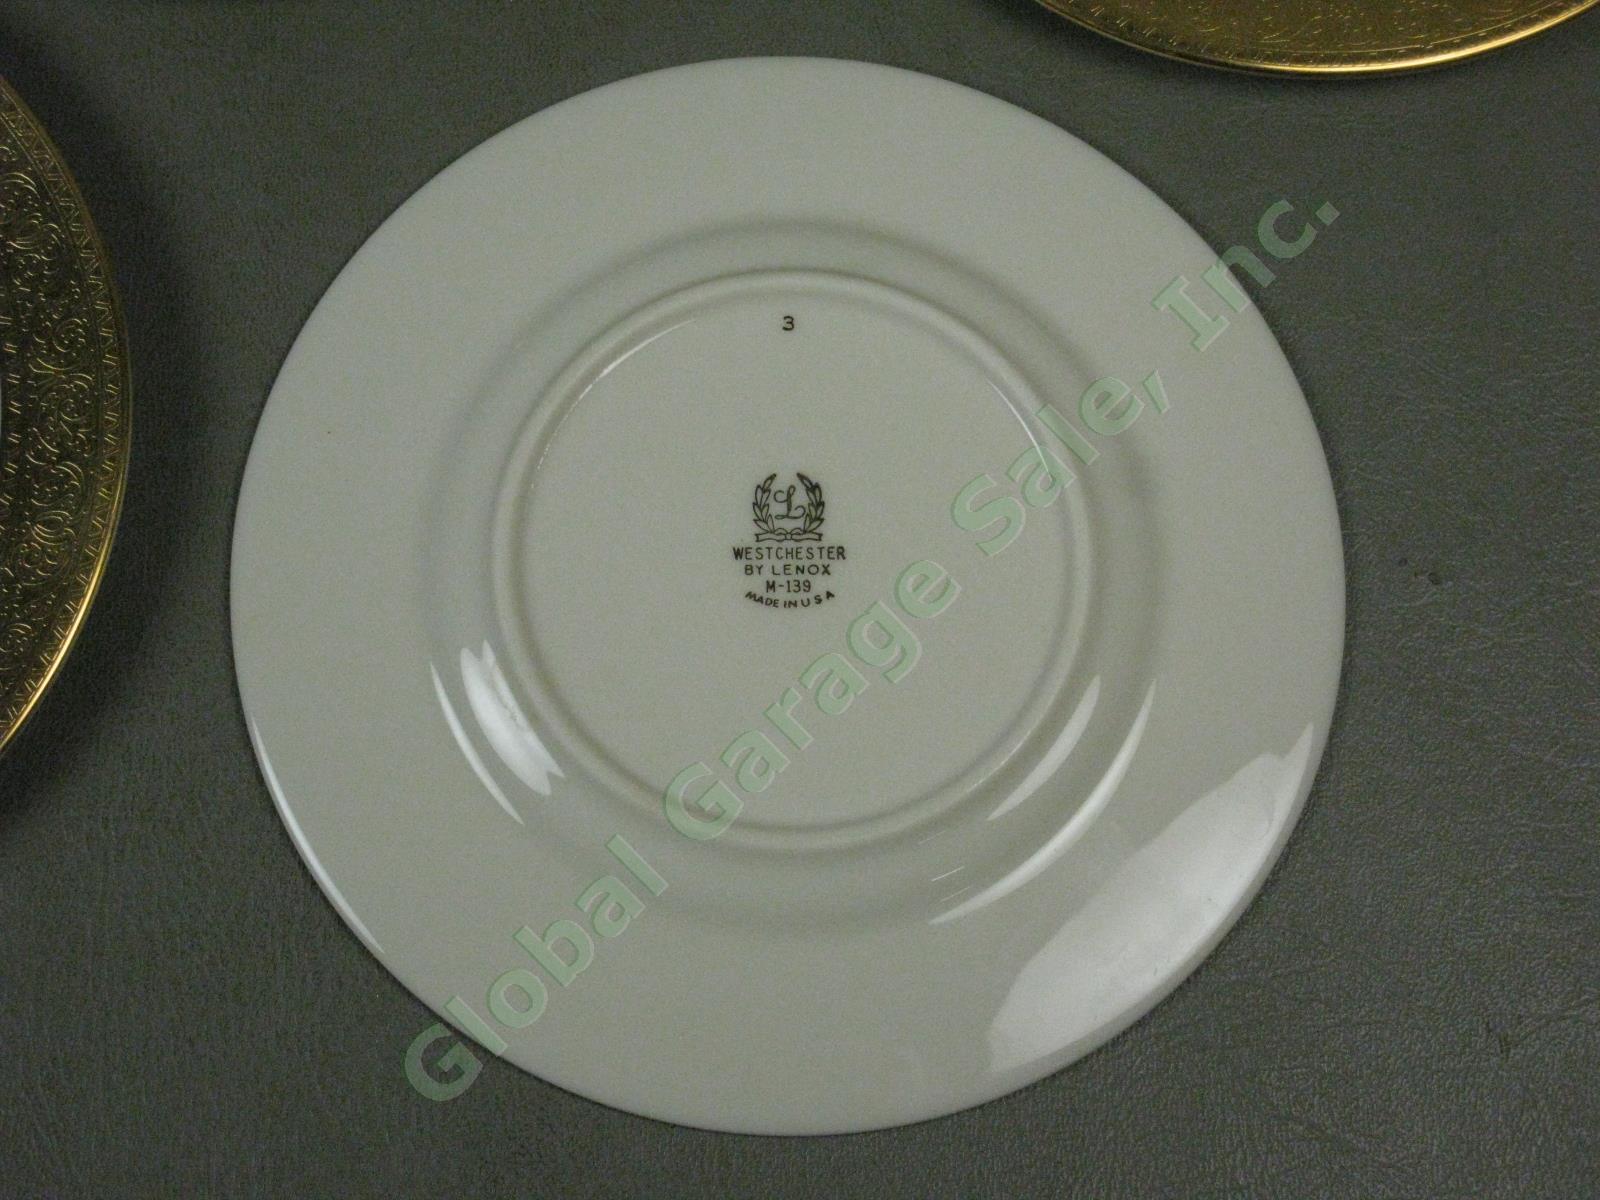 7 Lenox Westchester China M139 Presidential Gold Encrusted 6-3/8" Bread Plates 4